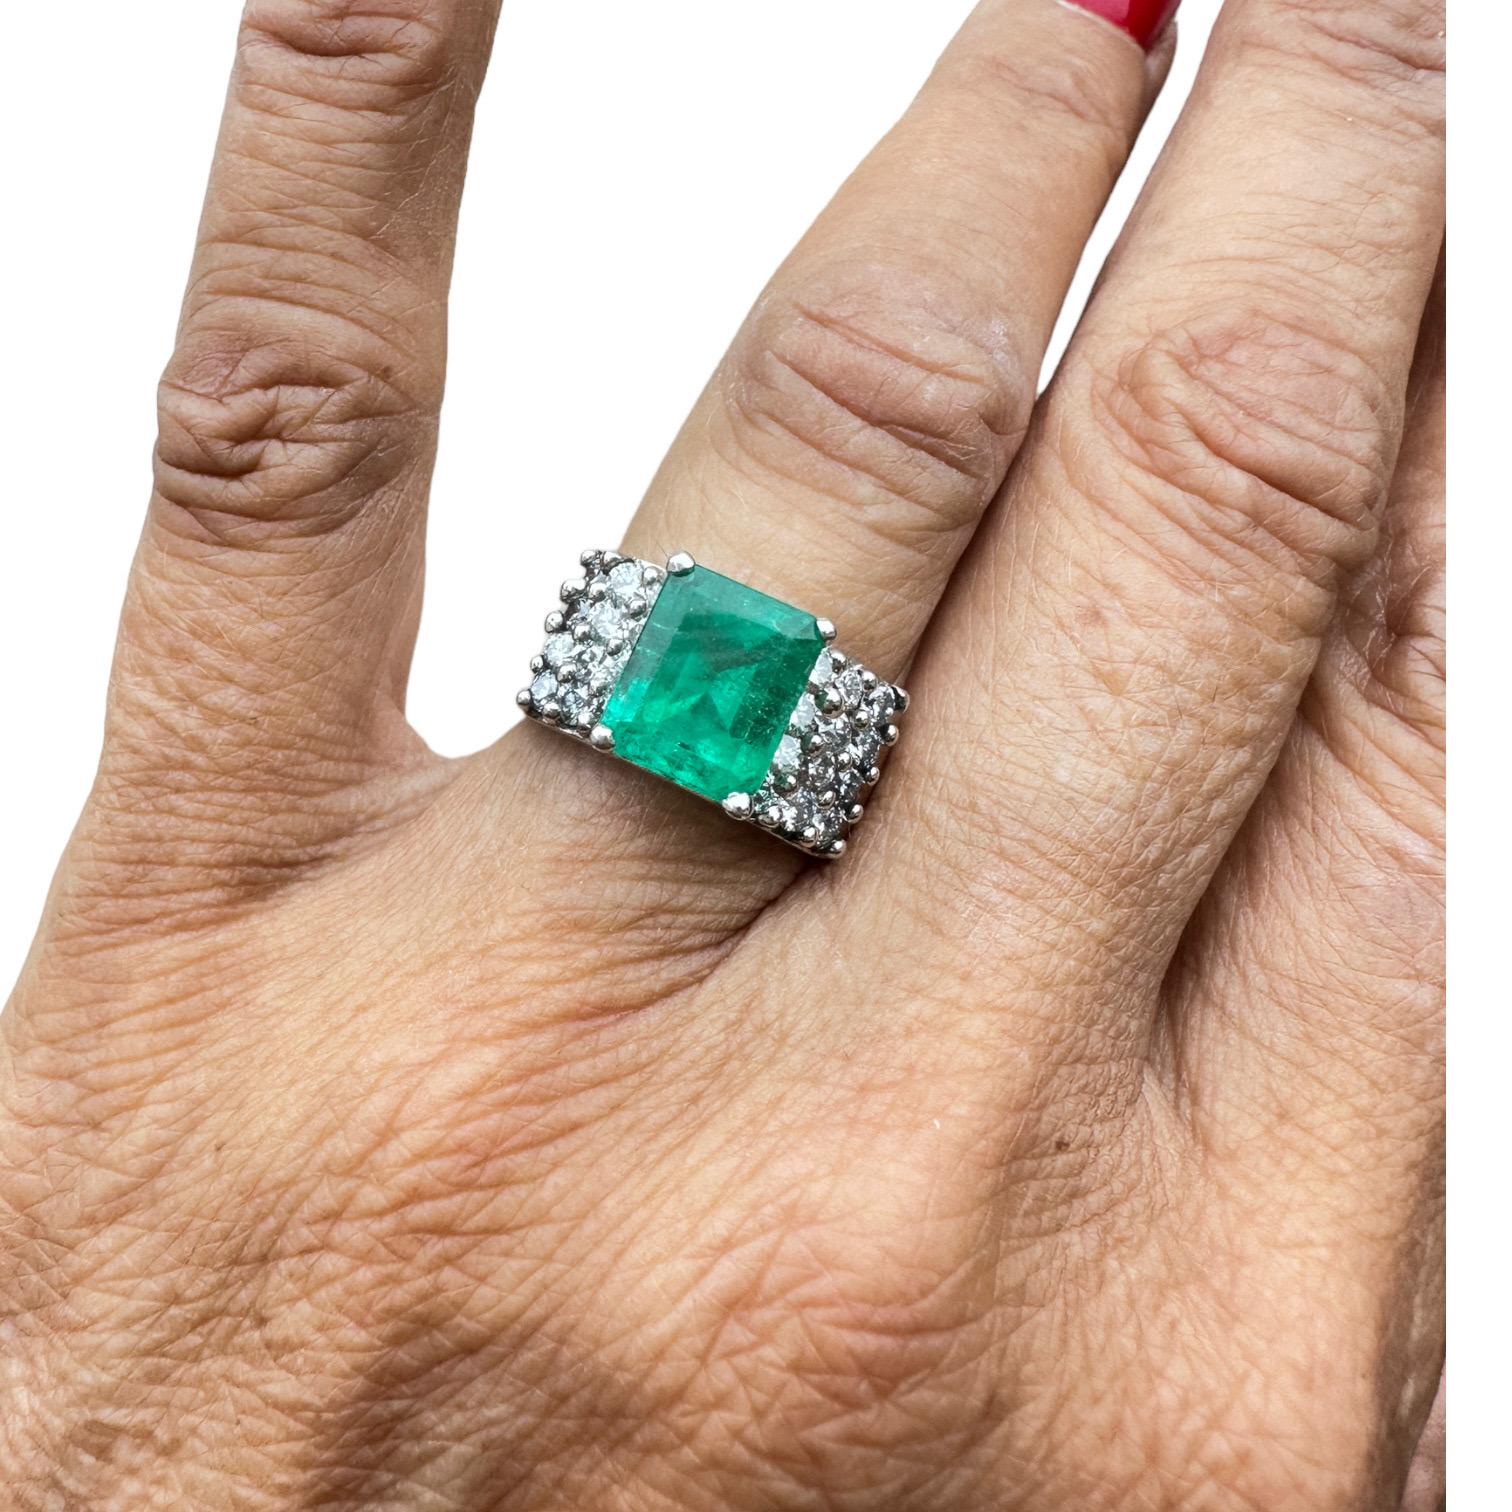 4.00 Carat Colombian Emerald and Diamond Ring 18kt. White Gold VS Quality In Good Condition For Sale In Laguna Hills, CA